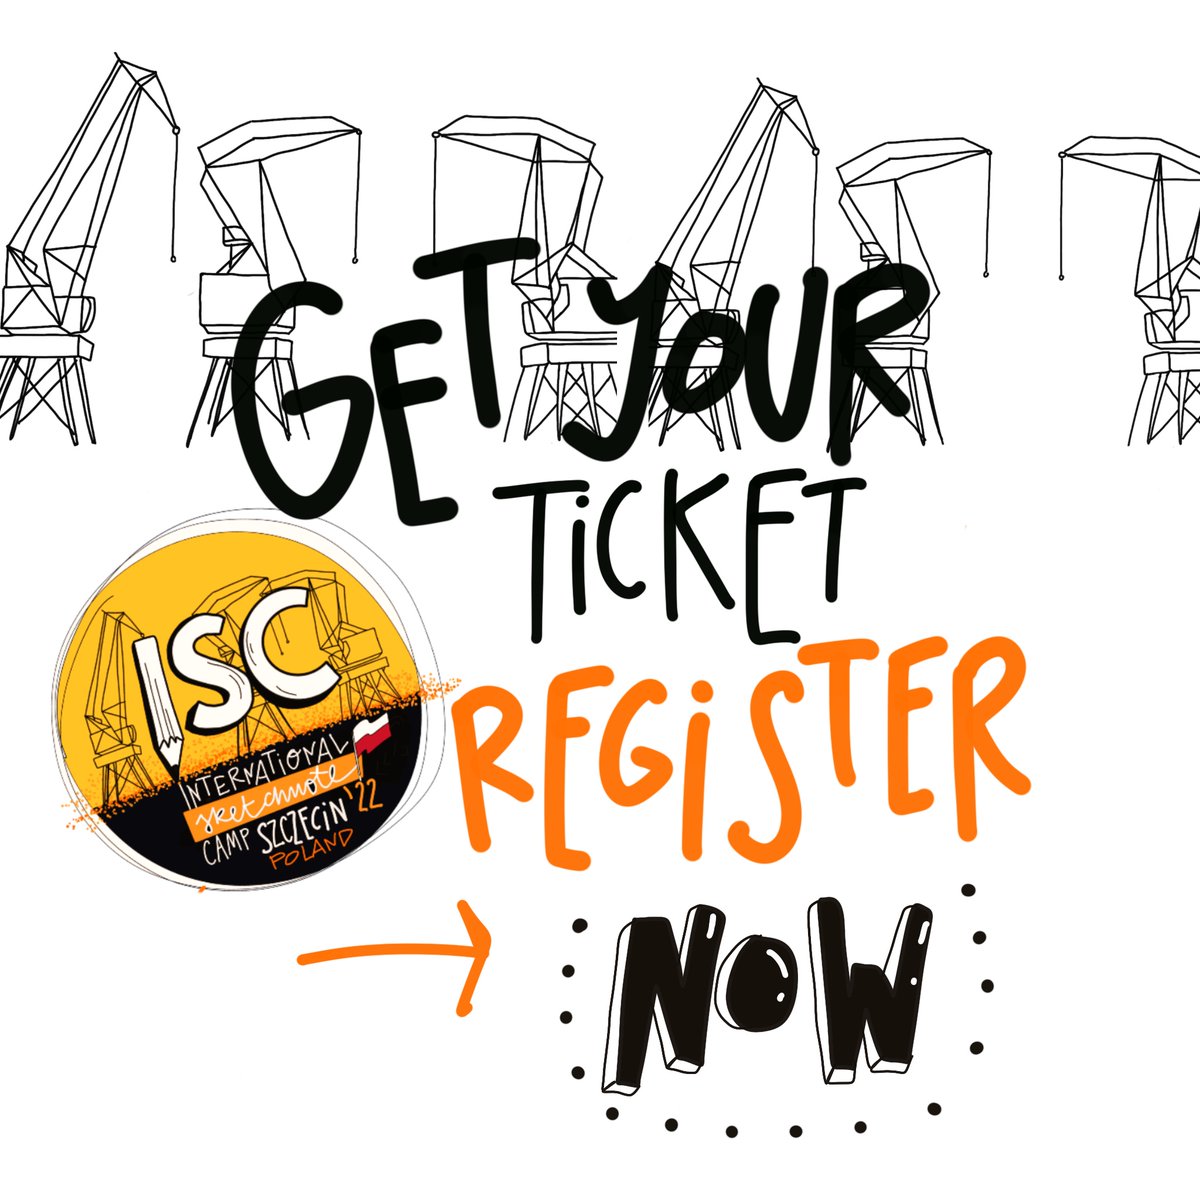 #ISC22PL - Registration is open now😁! Grab your Early Bird ticket and join us in Szczecin (9th-11th of September)! Link pretix.eu/zpsb/ISC22PL/. Will you participate? Let us know in comments🧡 @AniaStaskiewicz, @agata_baj , Ela, Maja and @MrChrisJWilson #skechnoting #sketchnotes